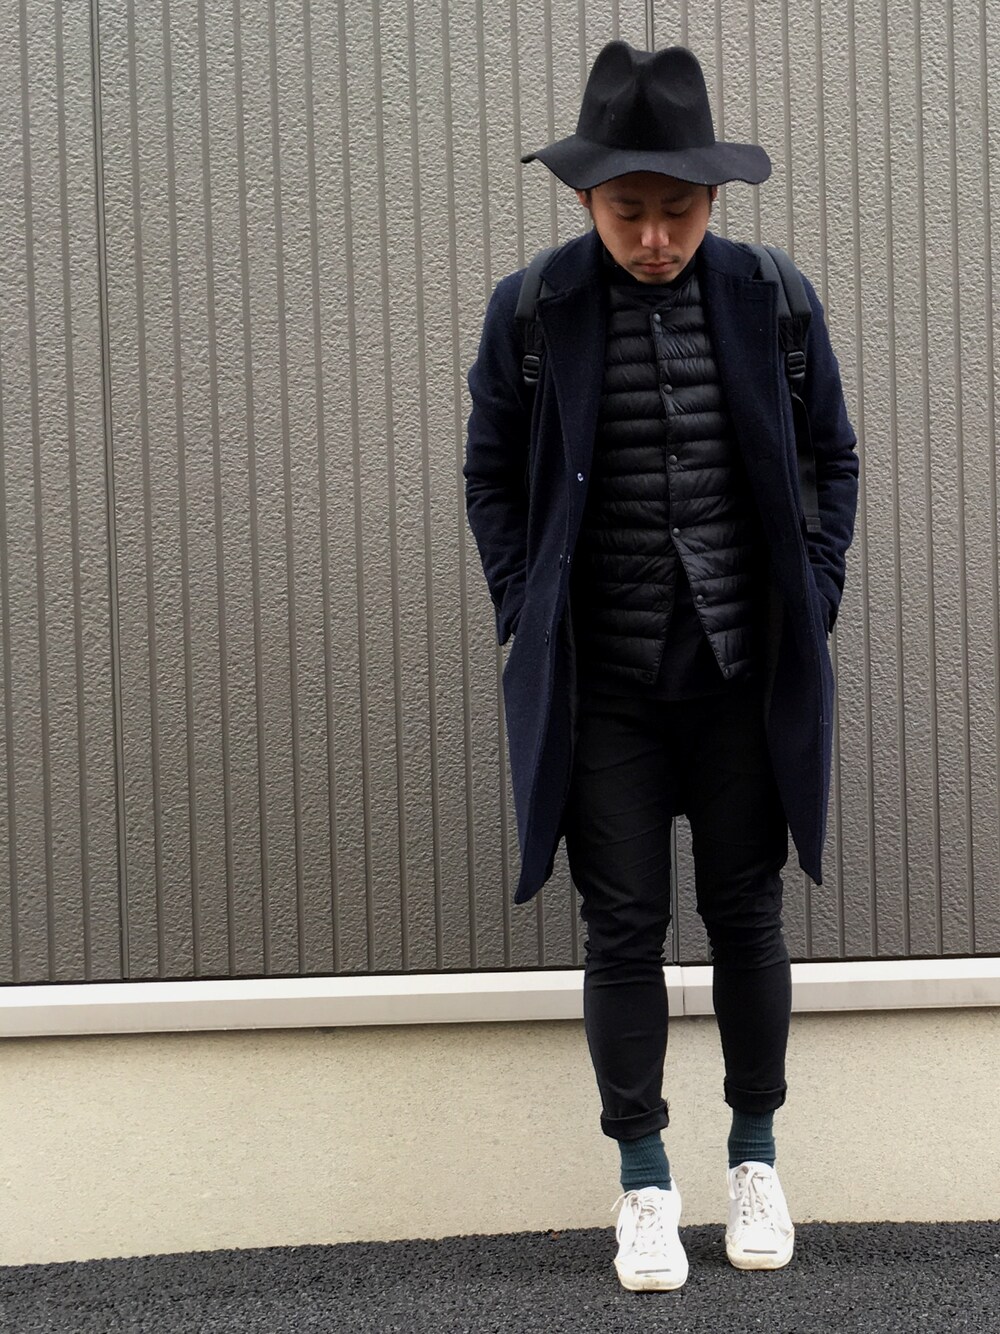 ShiNichiさんの「CONVERSE / LEATHER JACK PURCELL（JACK PURCELL）」を使ったコーディネート